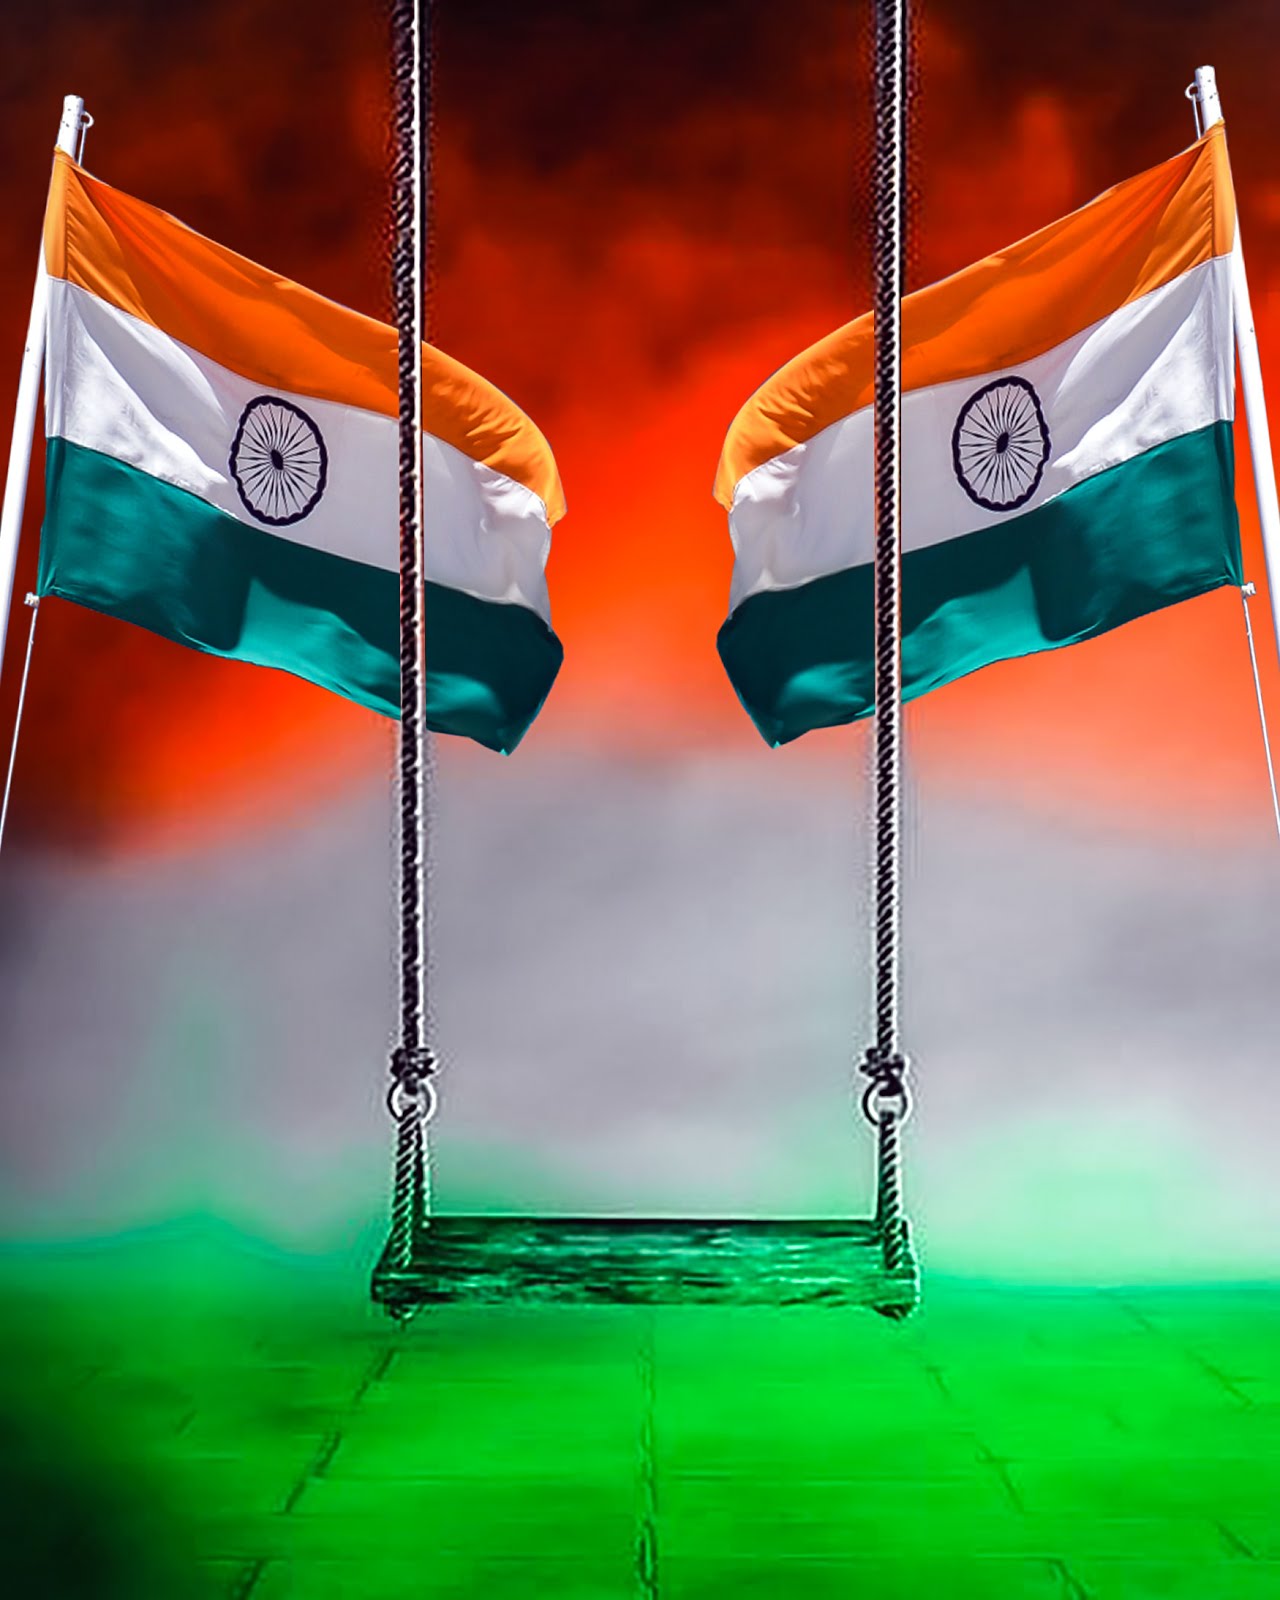 15 August 2019 cb background download, Independence day background download  2019,Indian flag background for photo editing - LEARNINGWITHSR